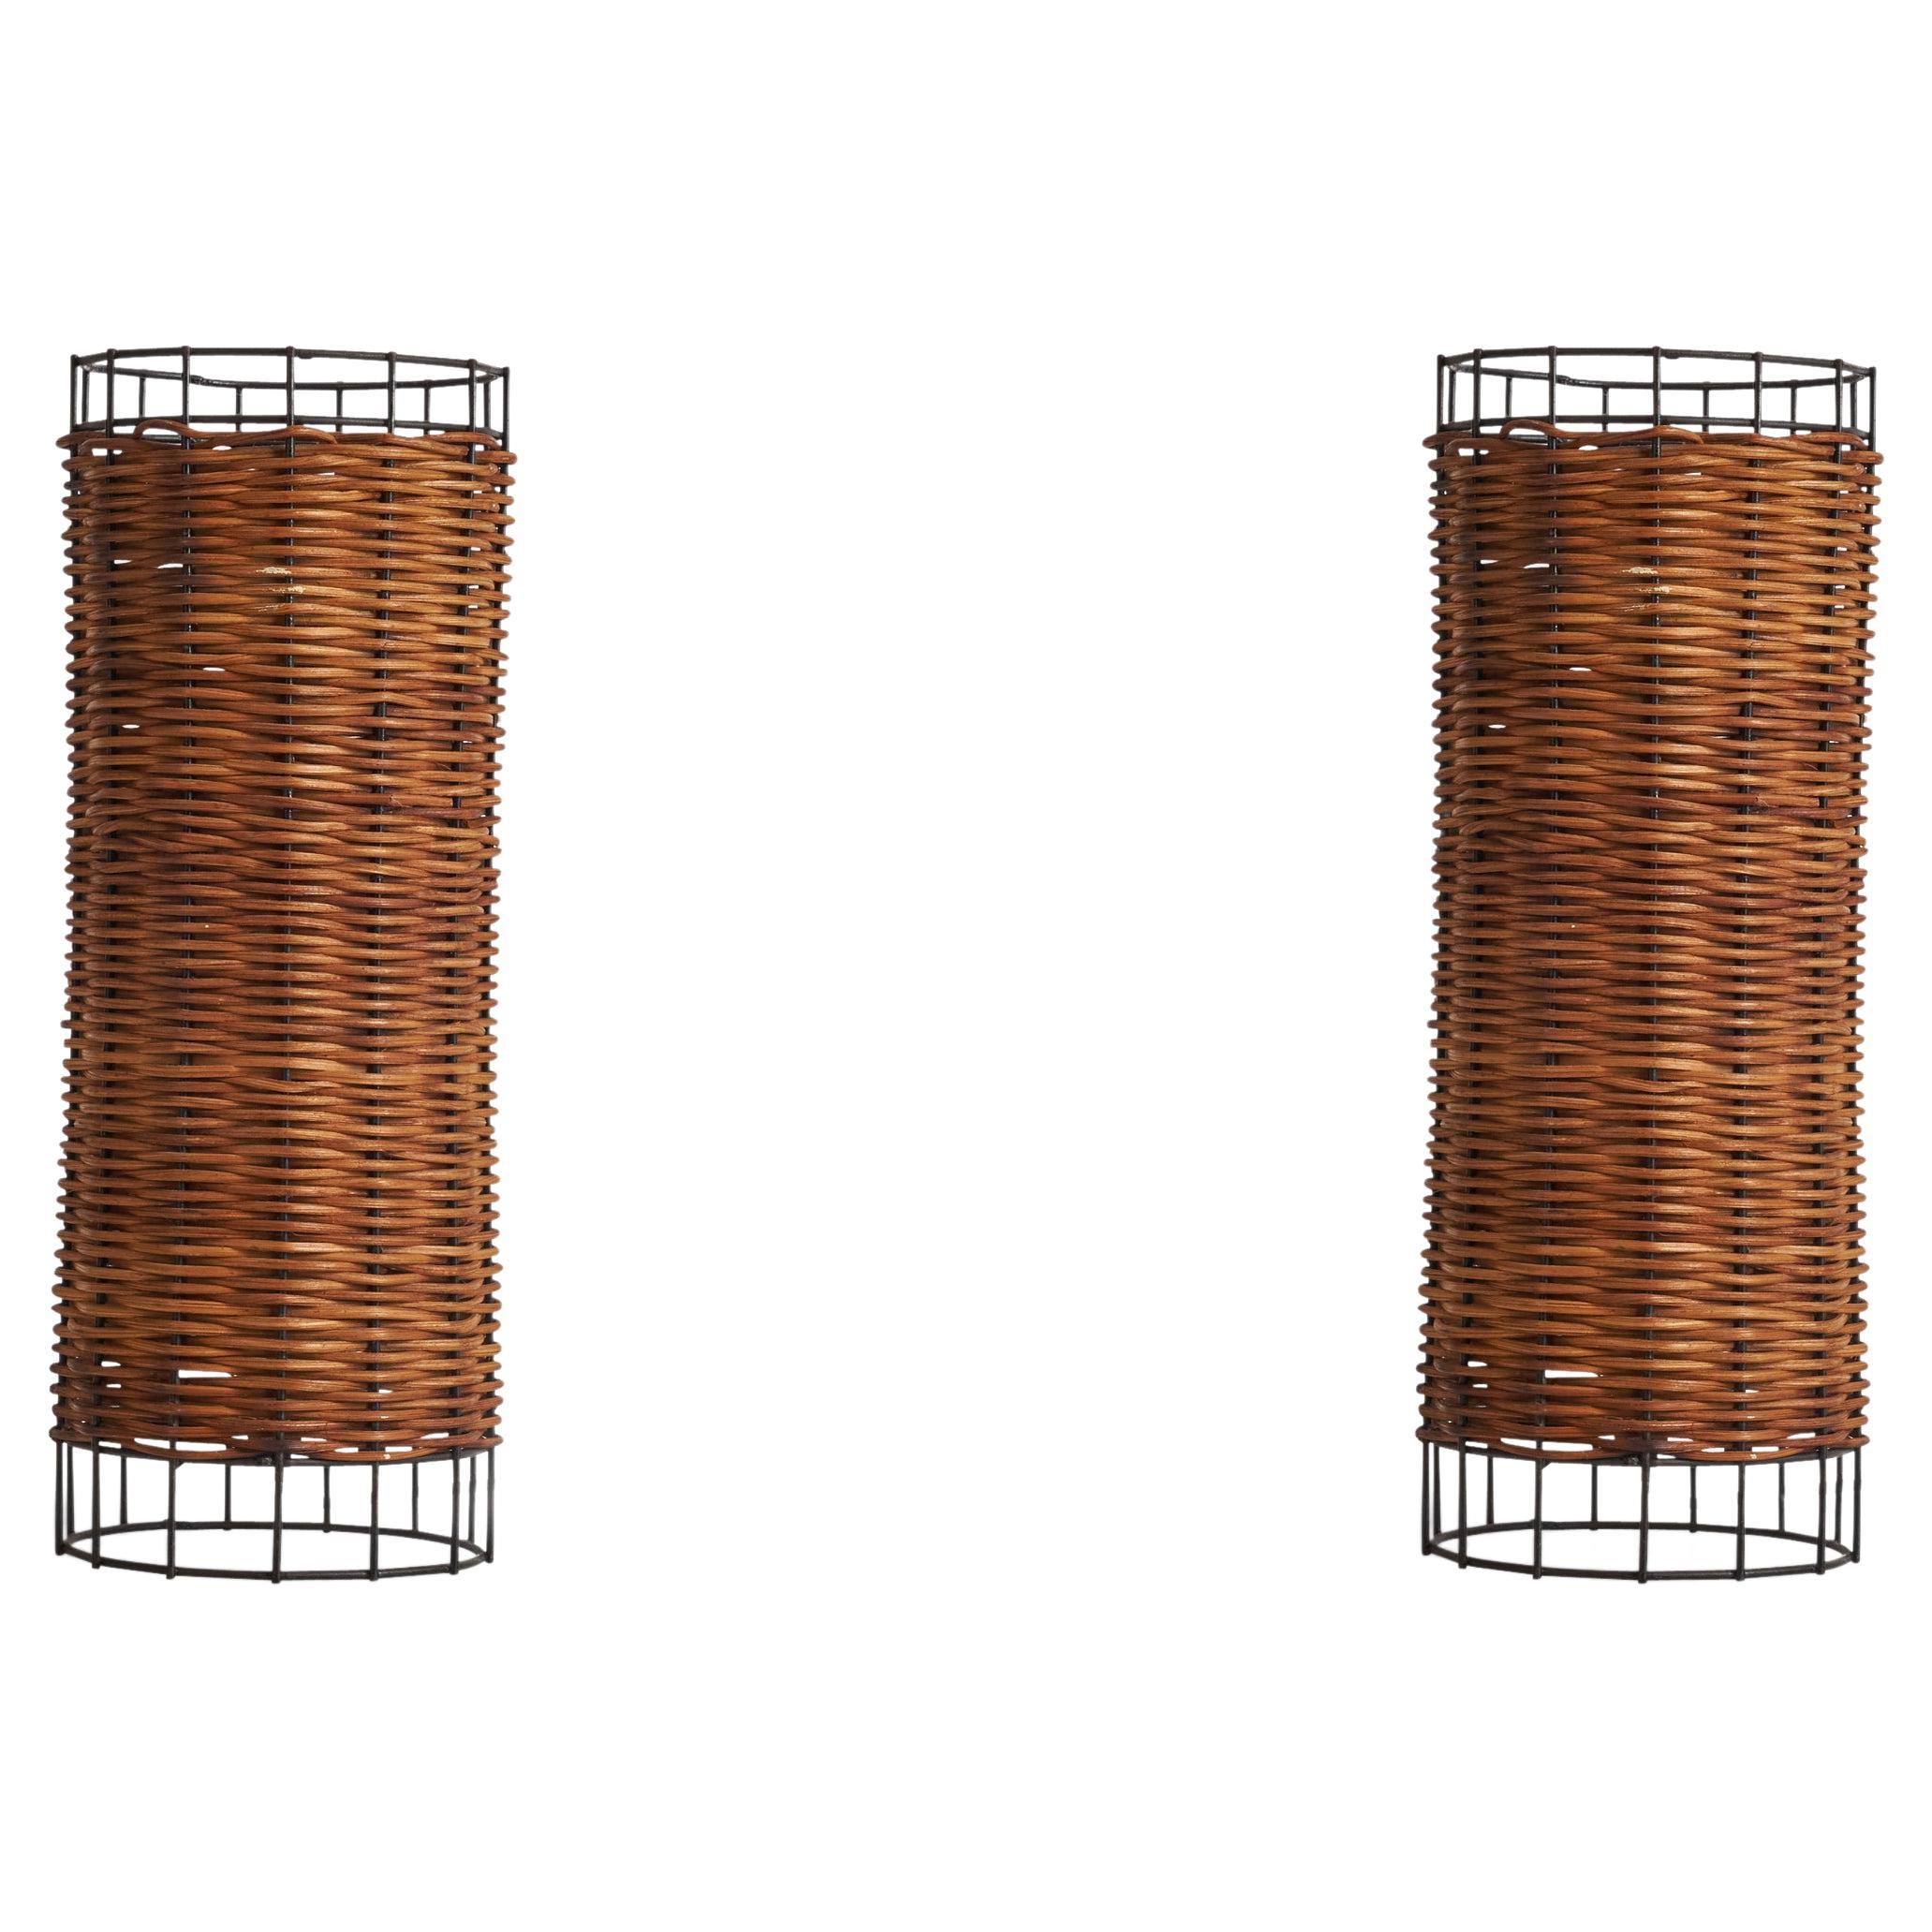 American Designer, Table Lamps, Lacquered Metal, Rattan, USA, 1950s